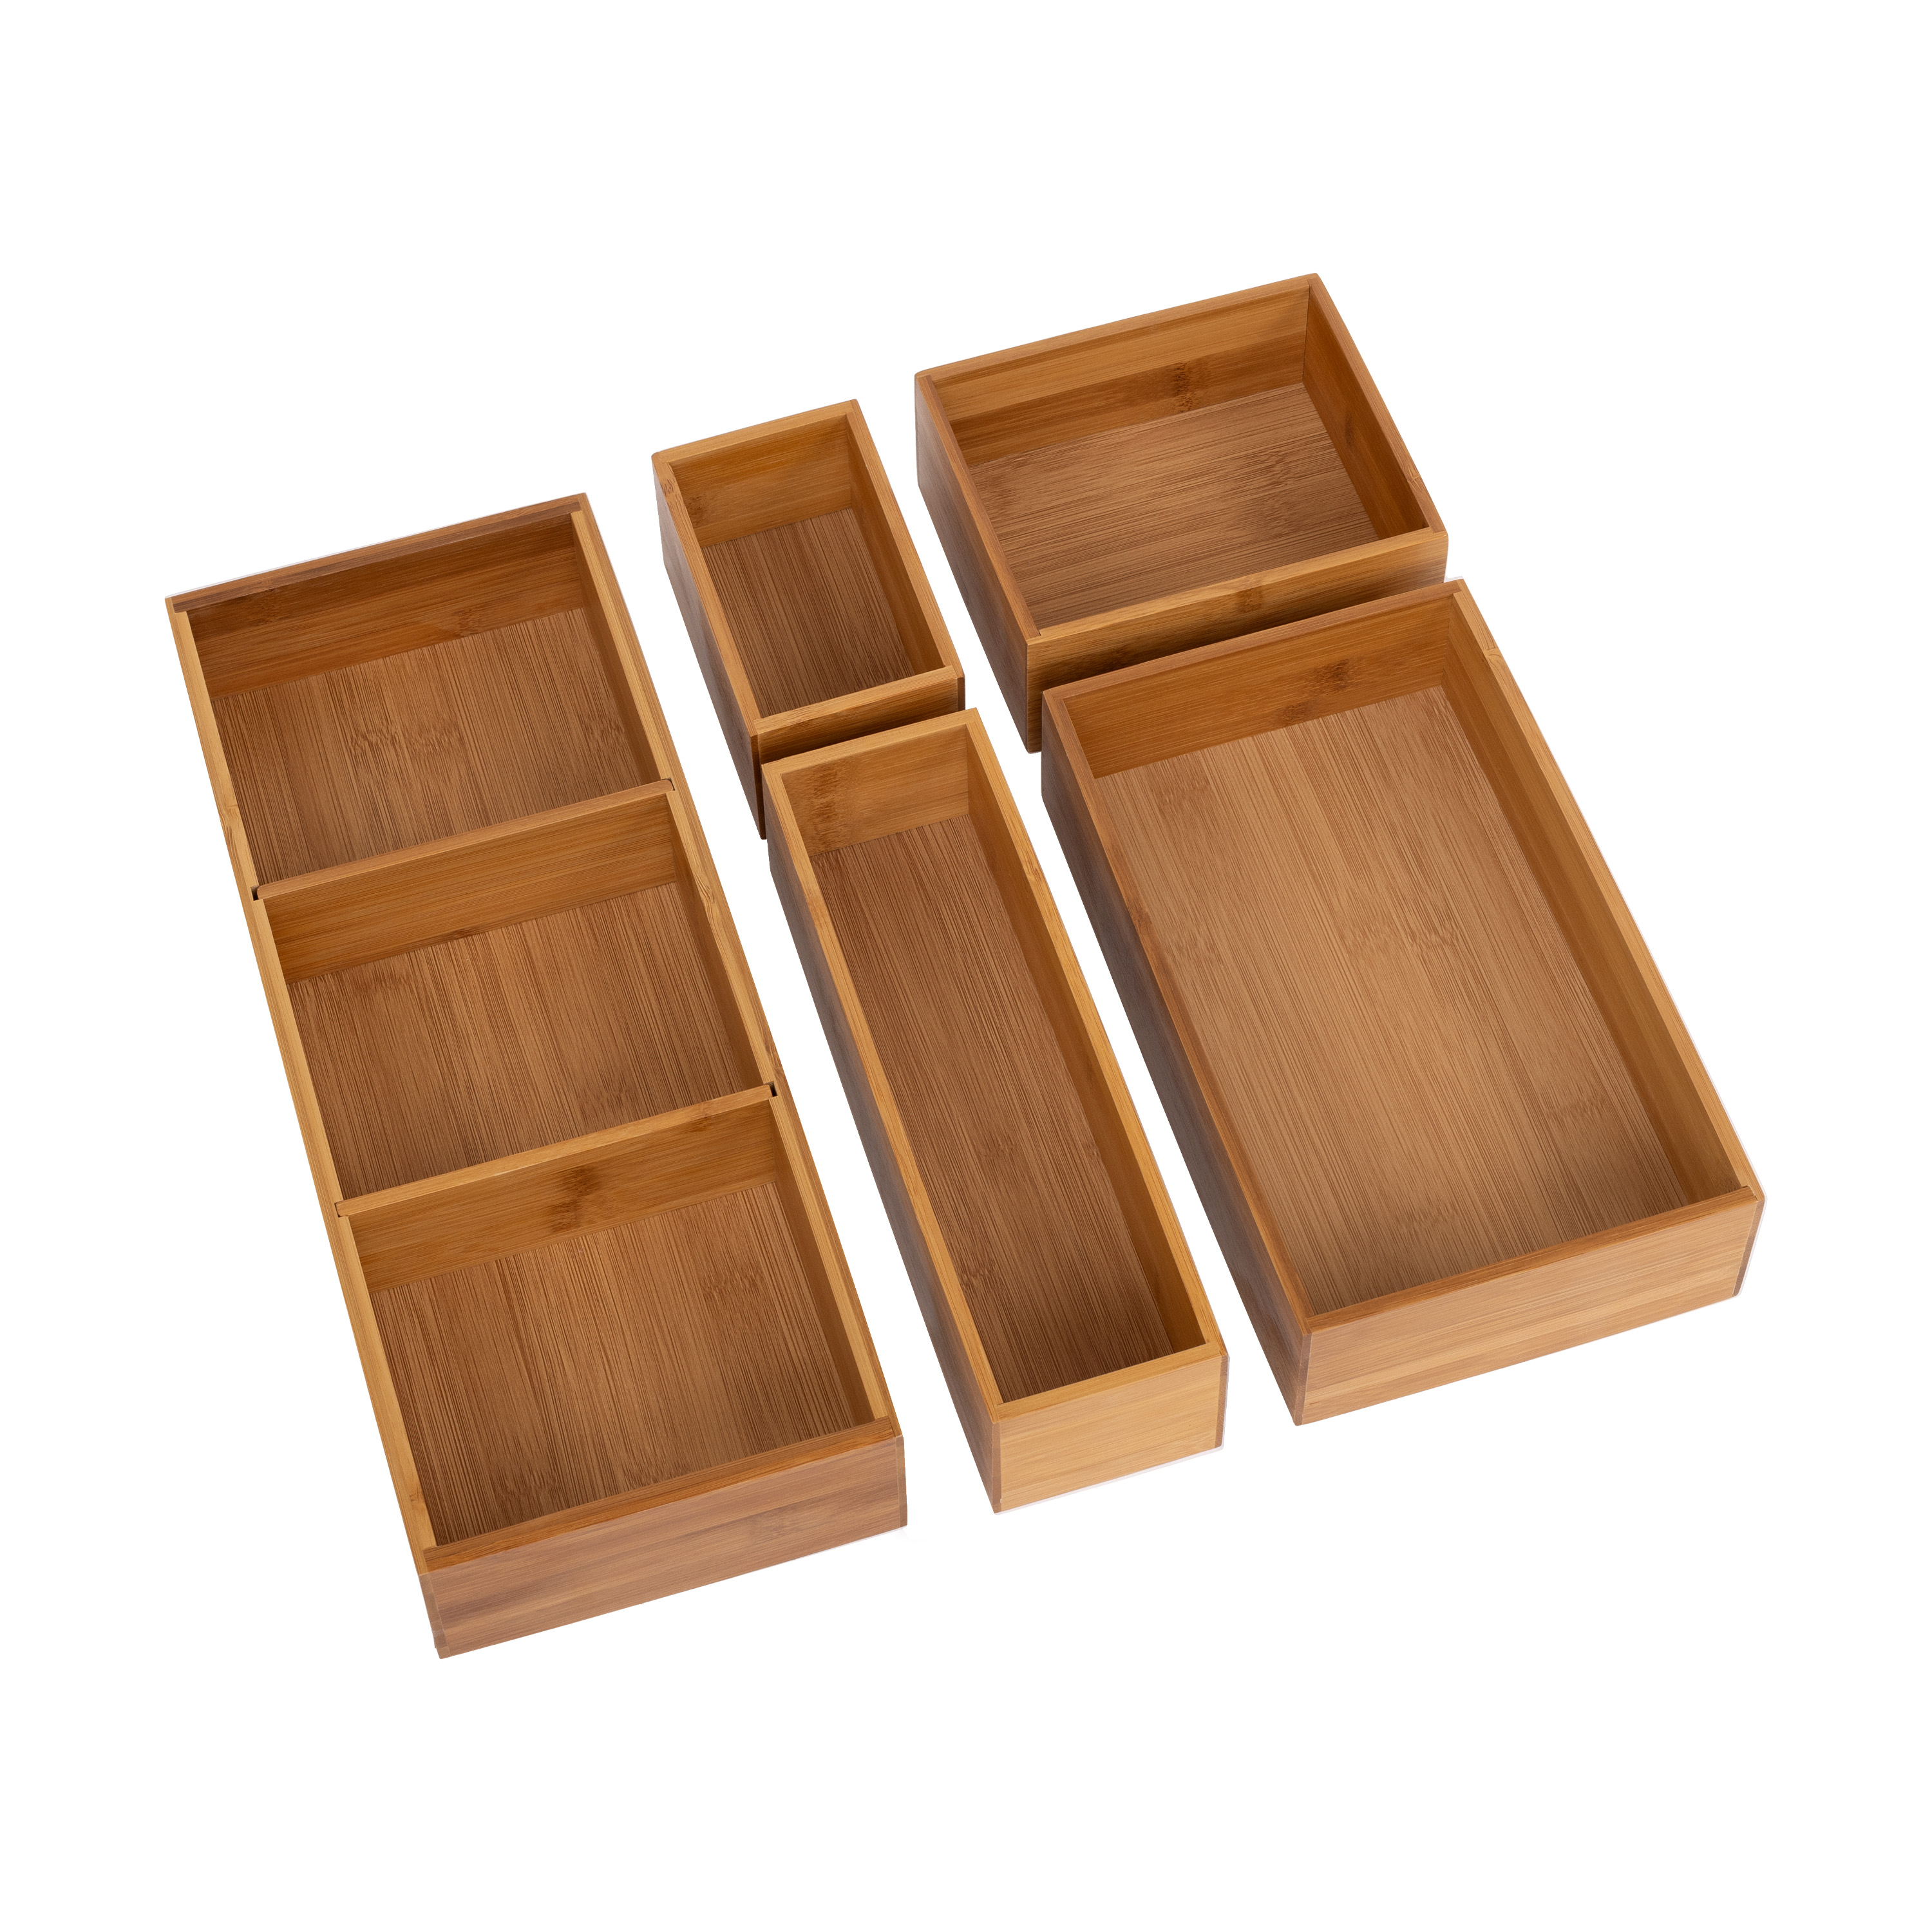 5-Piece Bamboo Storage Box Set with 3 Compartments by Seville Classics - image 2 of 14